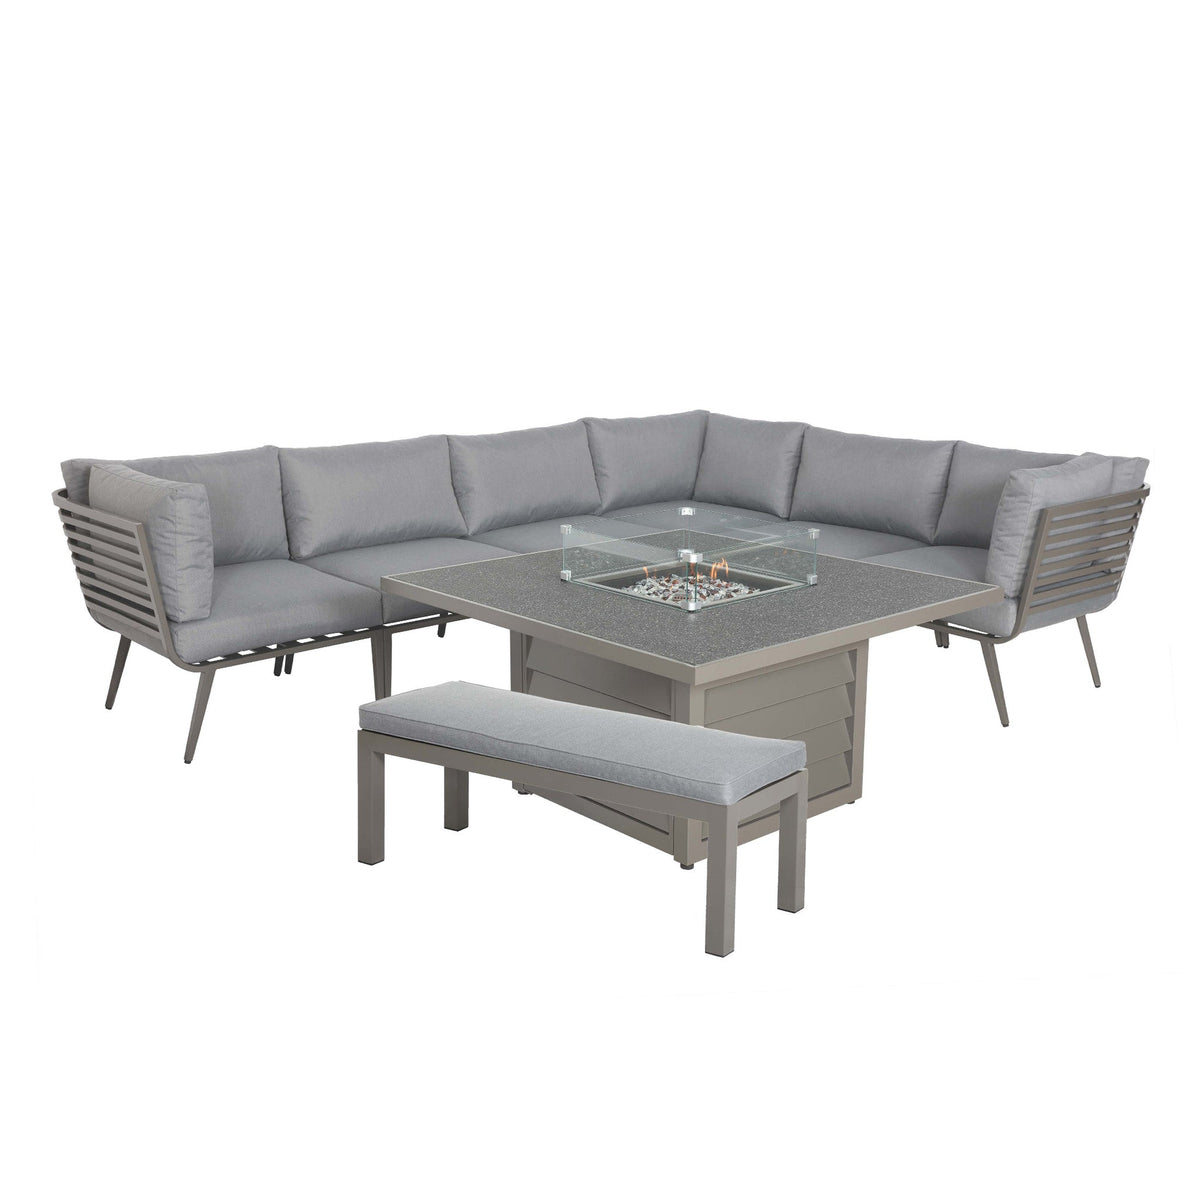 Mayfair 120cm Grey Outdoor Corner Fire Pit Table Lounge Set and Benches